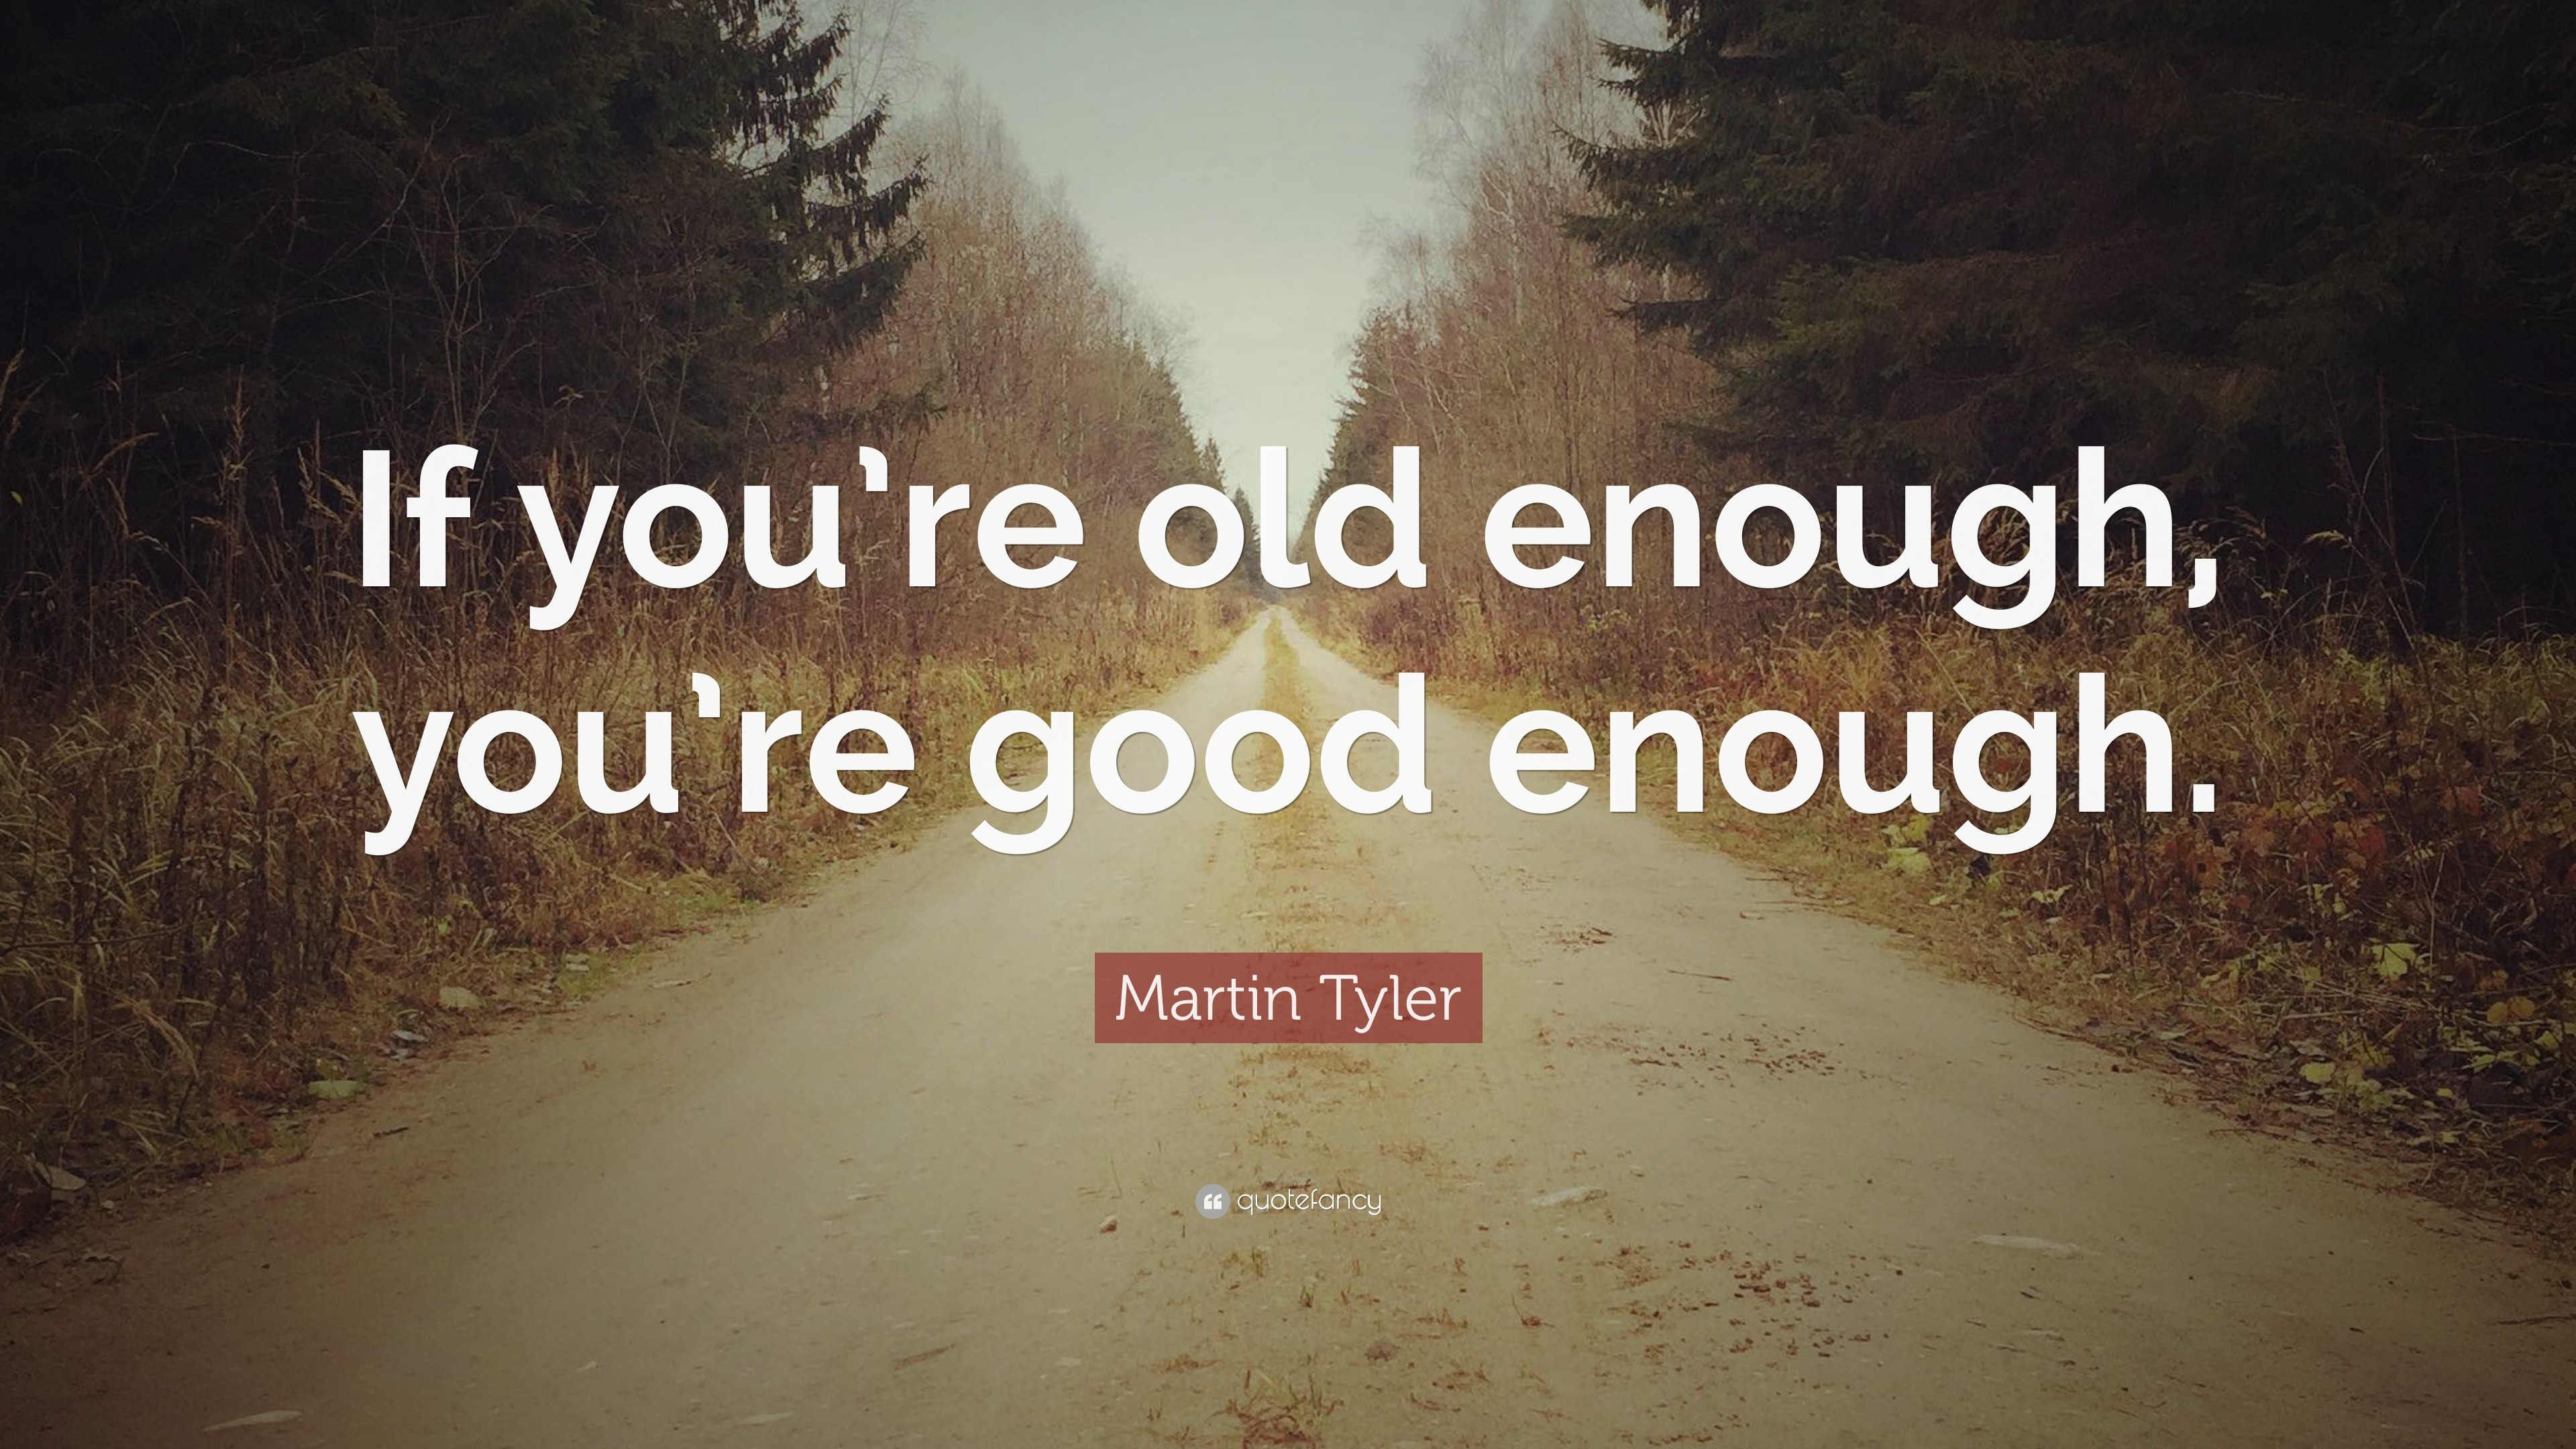 If you are good enough, you are old enough